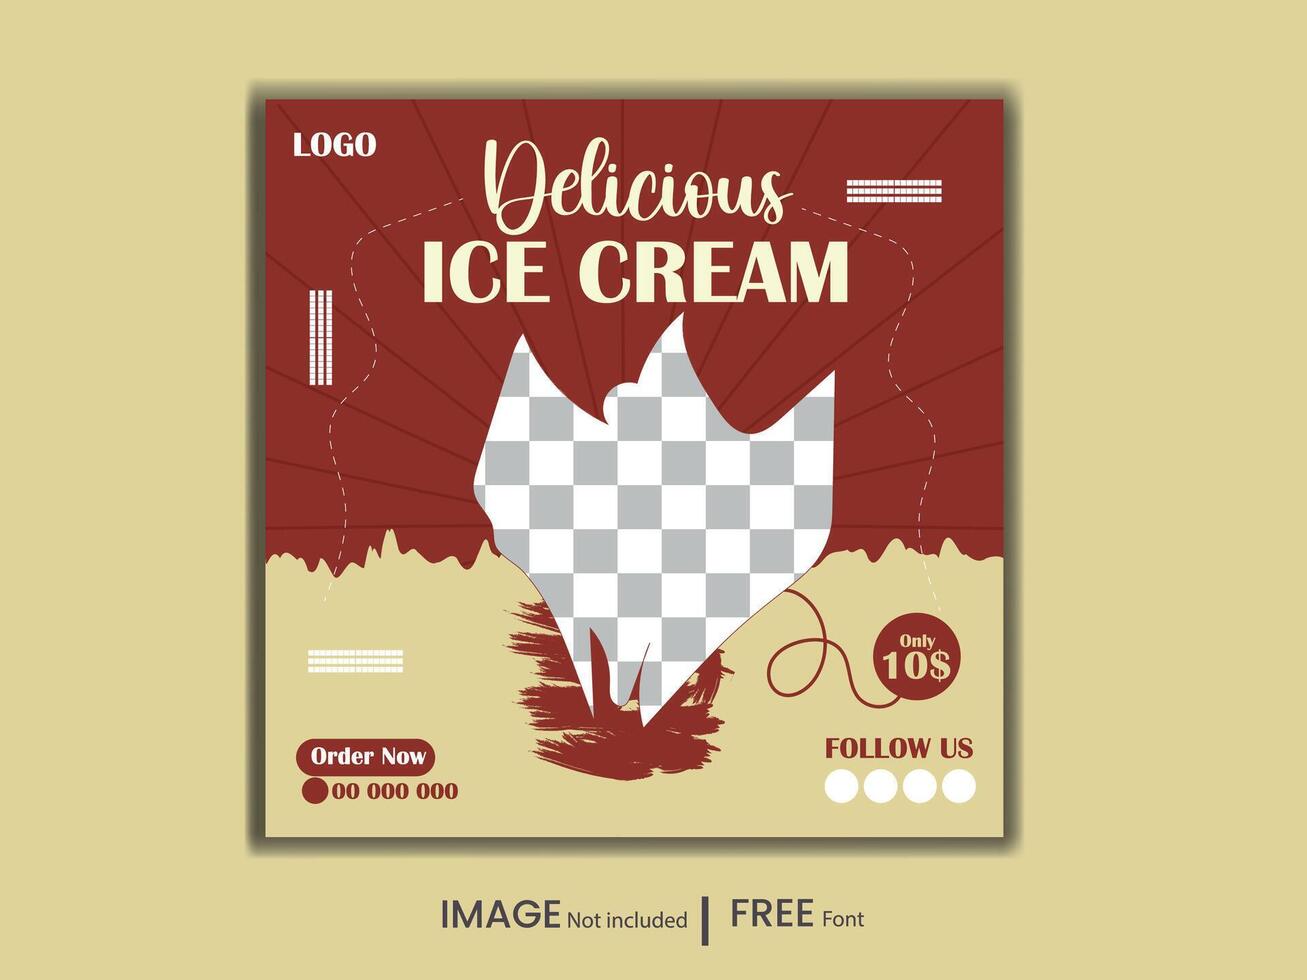 Super delicious ice cream social media banner promotional post or discount offer post design template vector